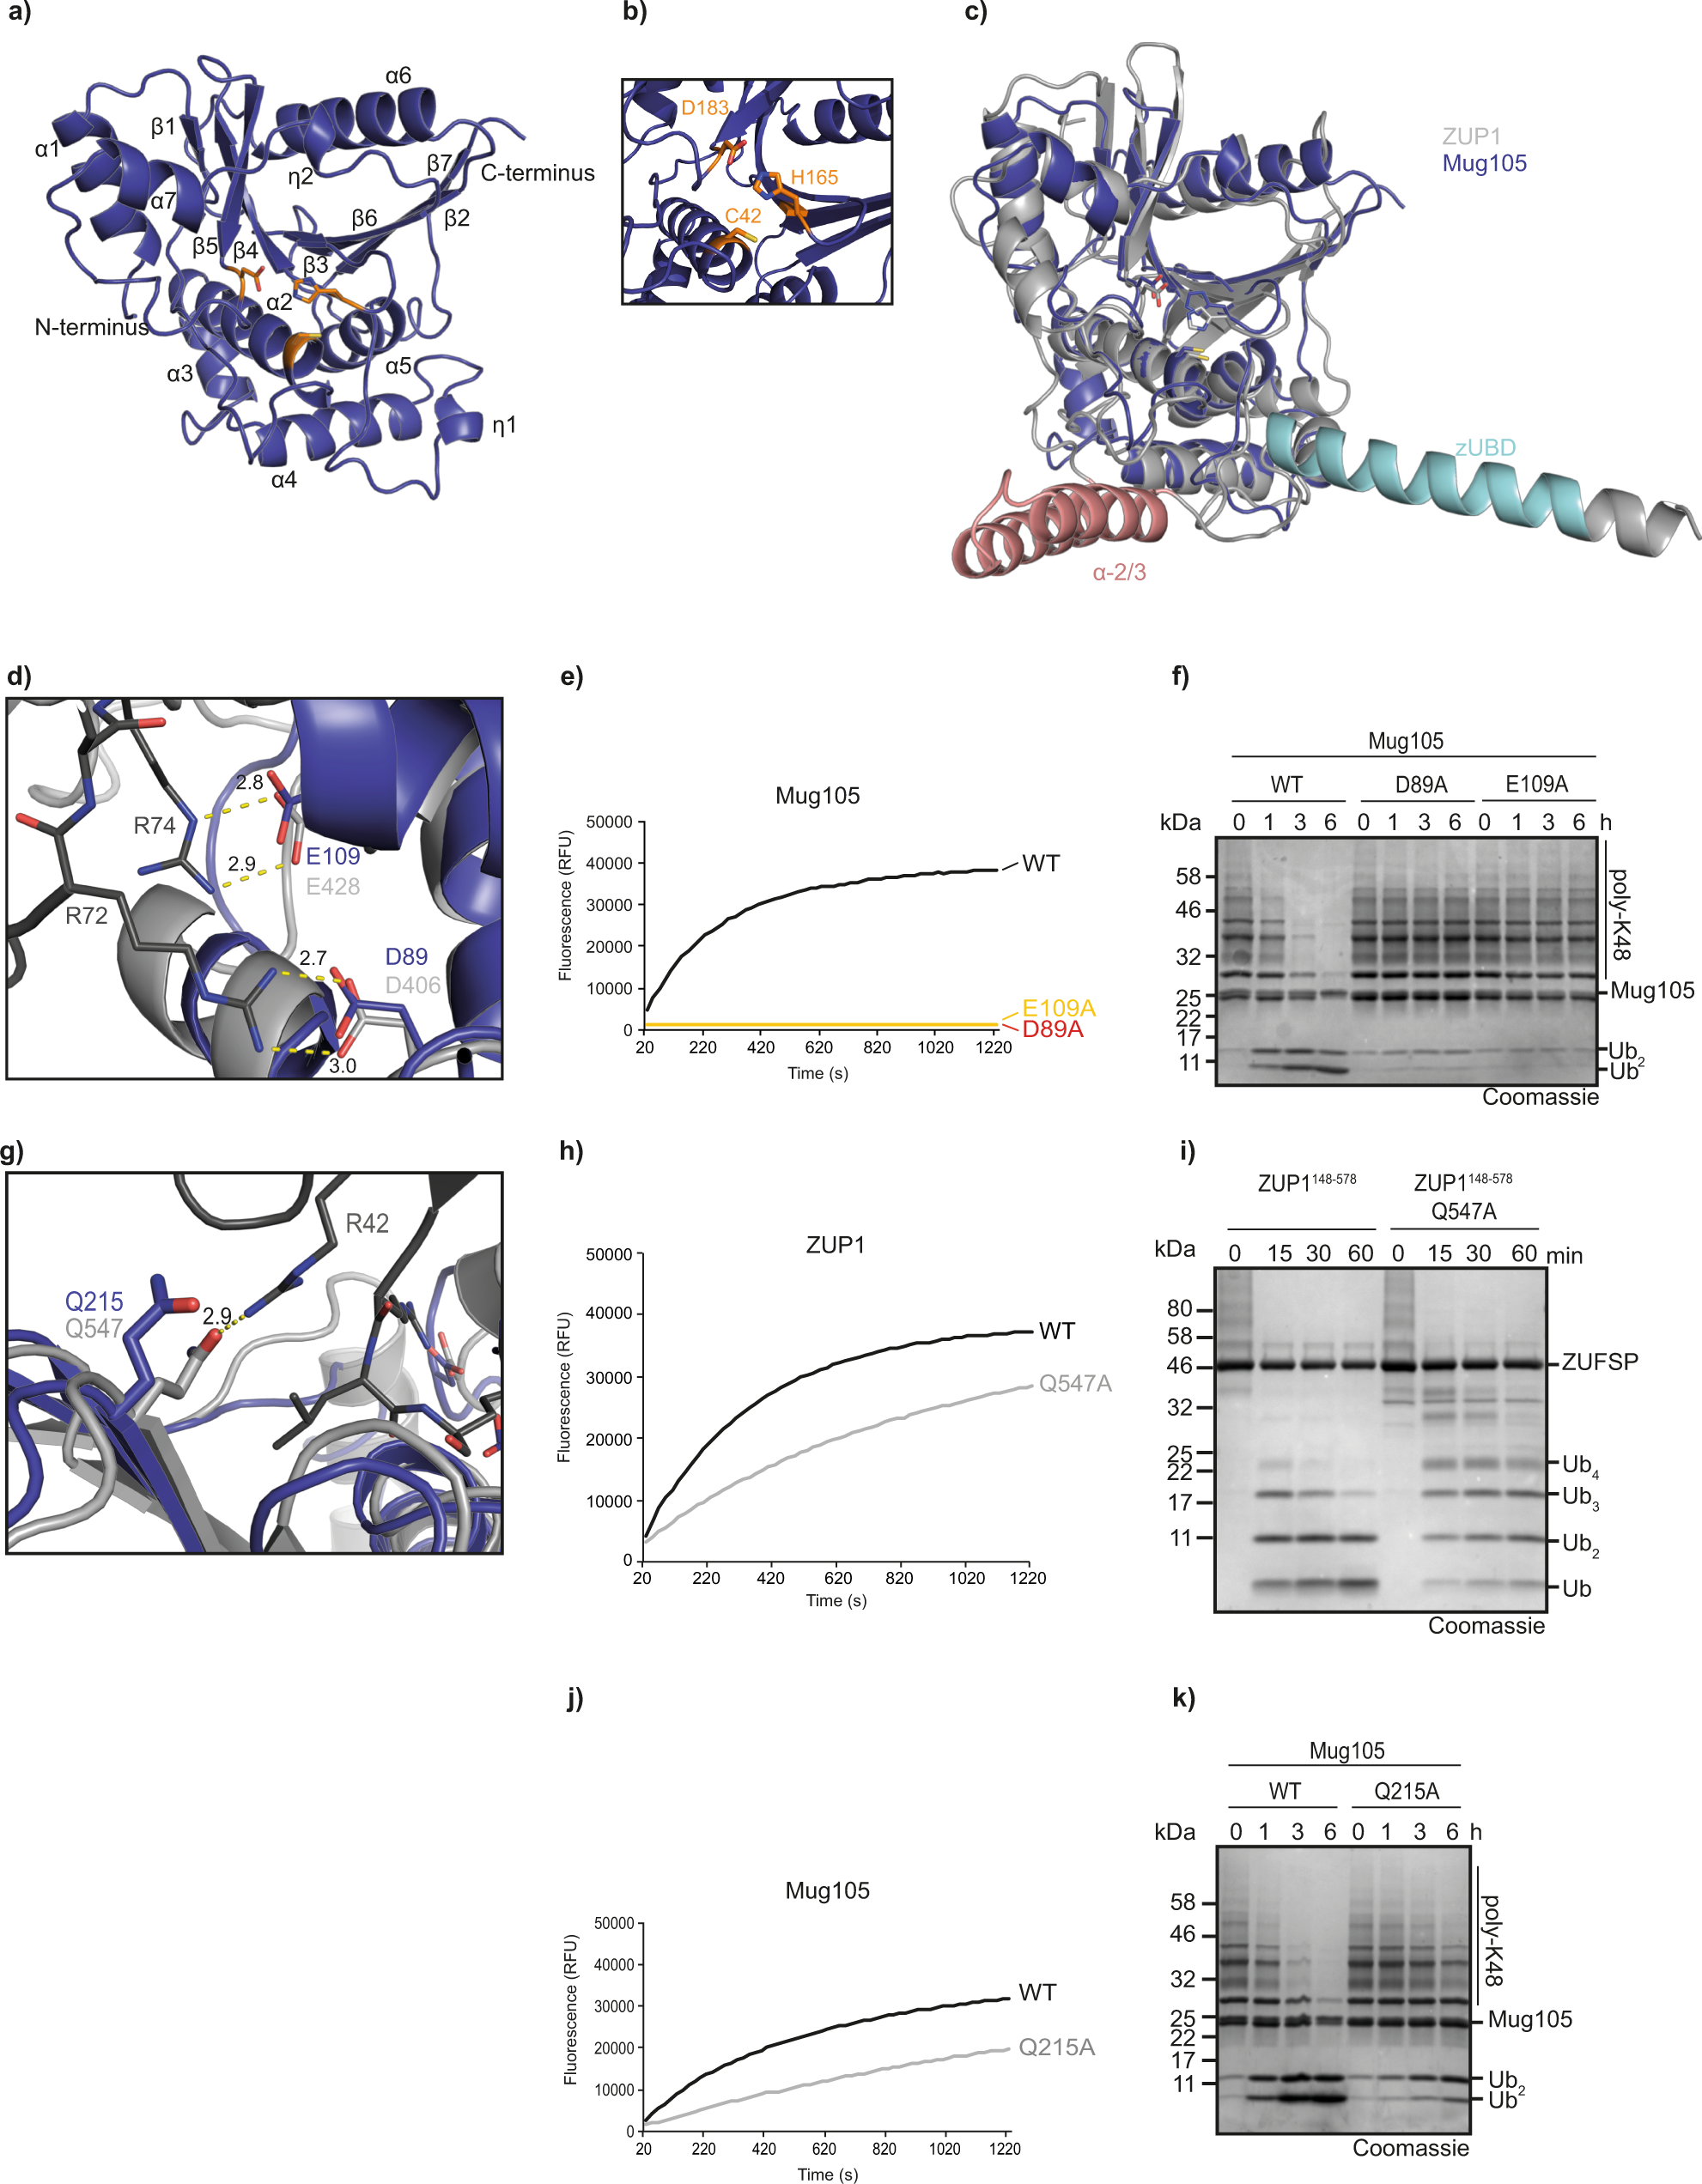 A structural basis for the diverse linkage specificities within the ZUFSP  deubiquitinase family | Nature Communications